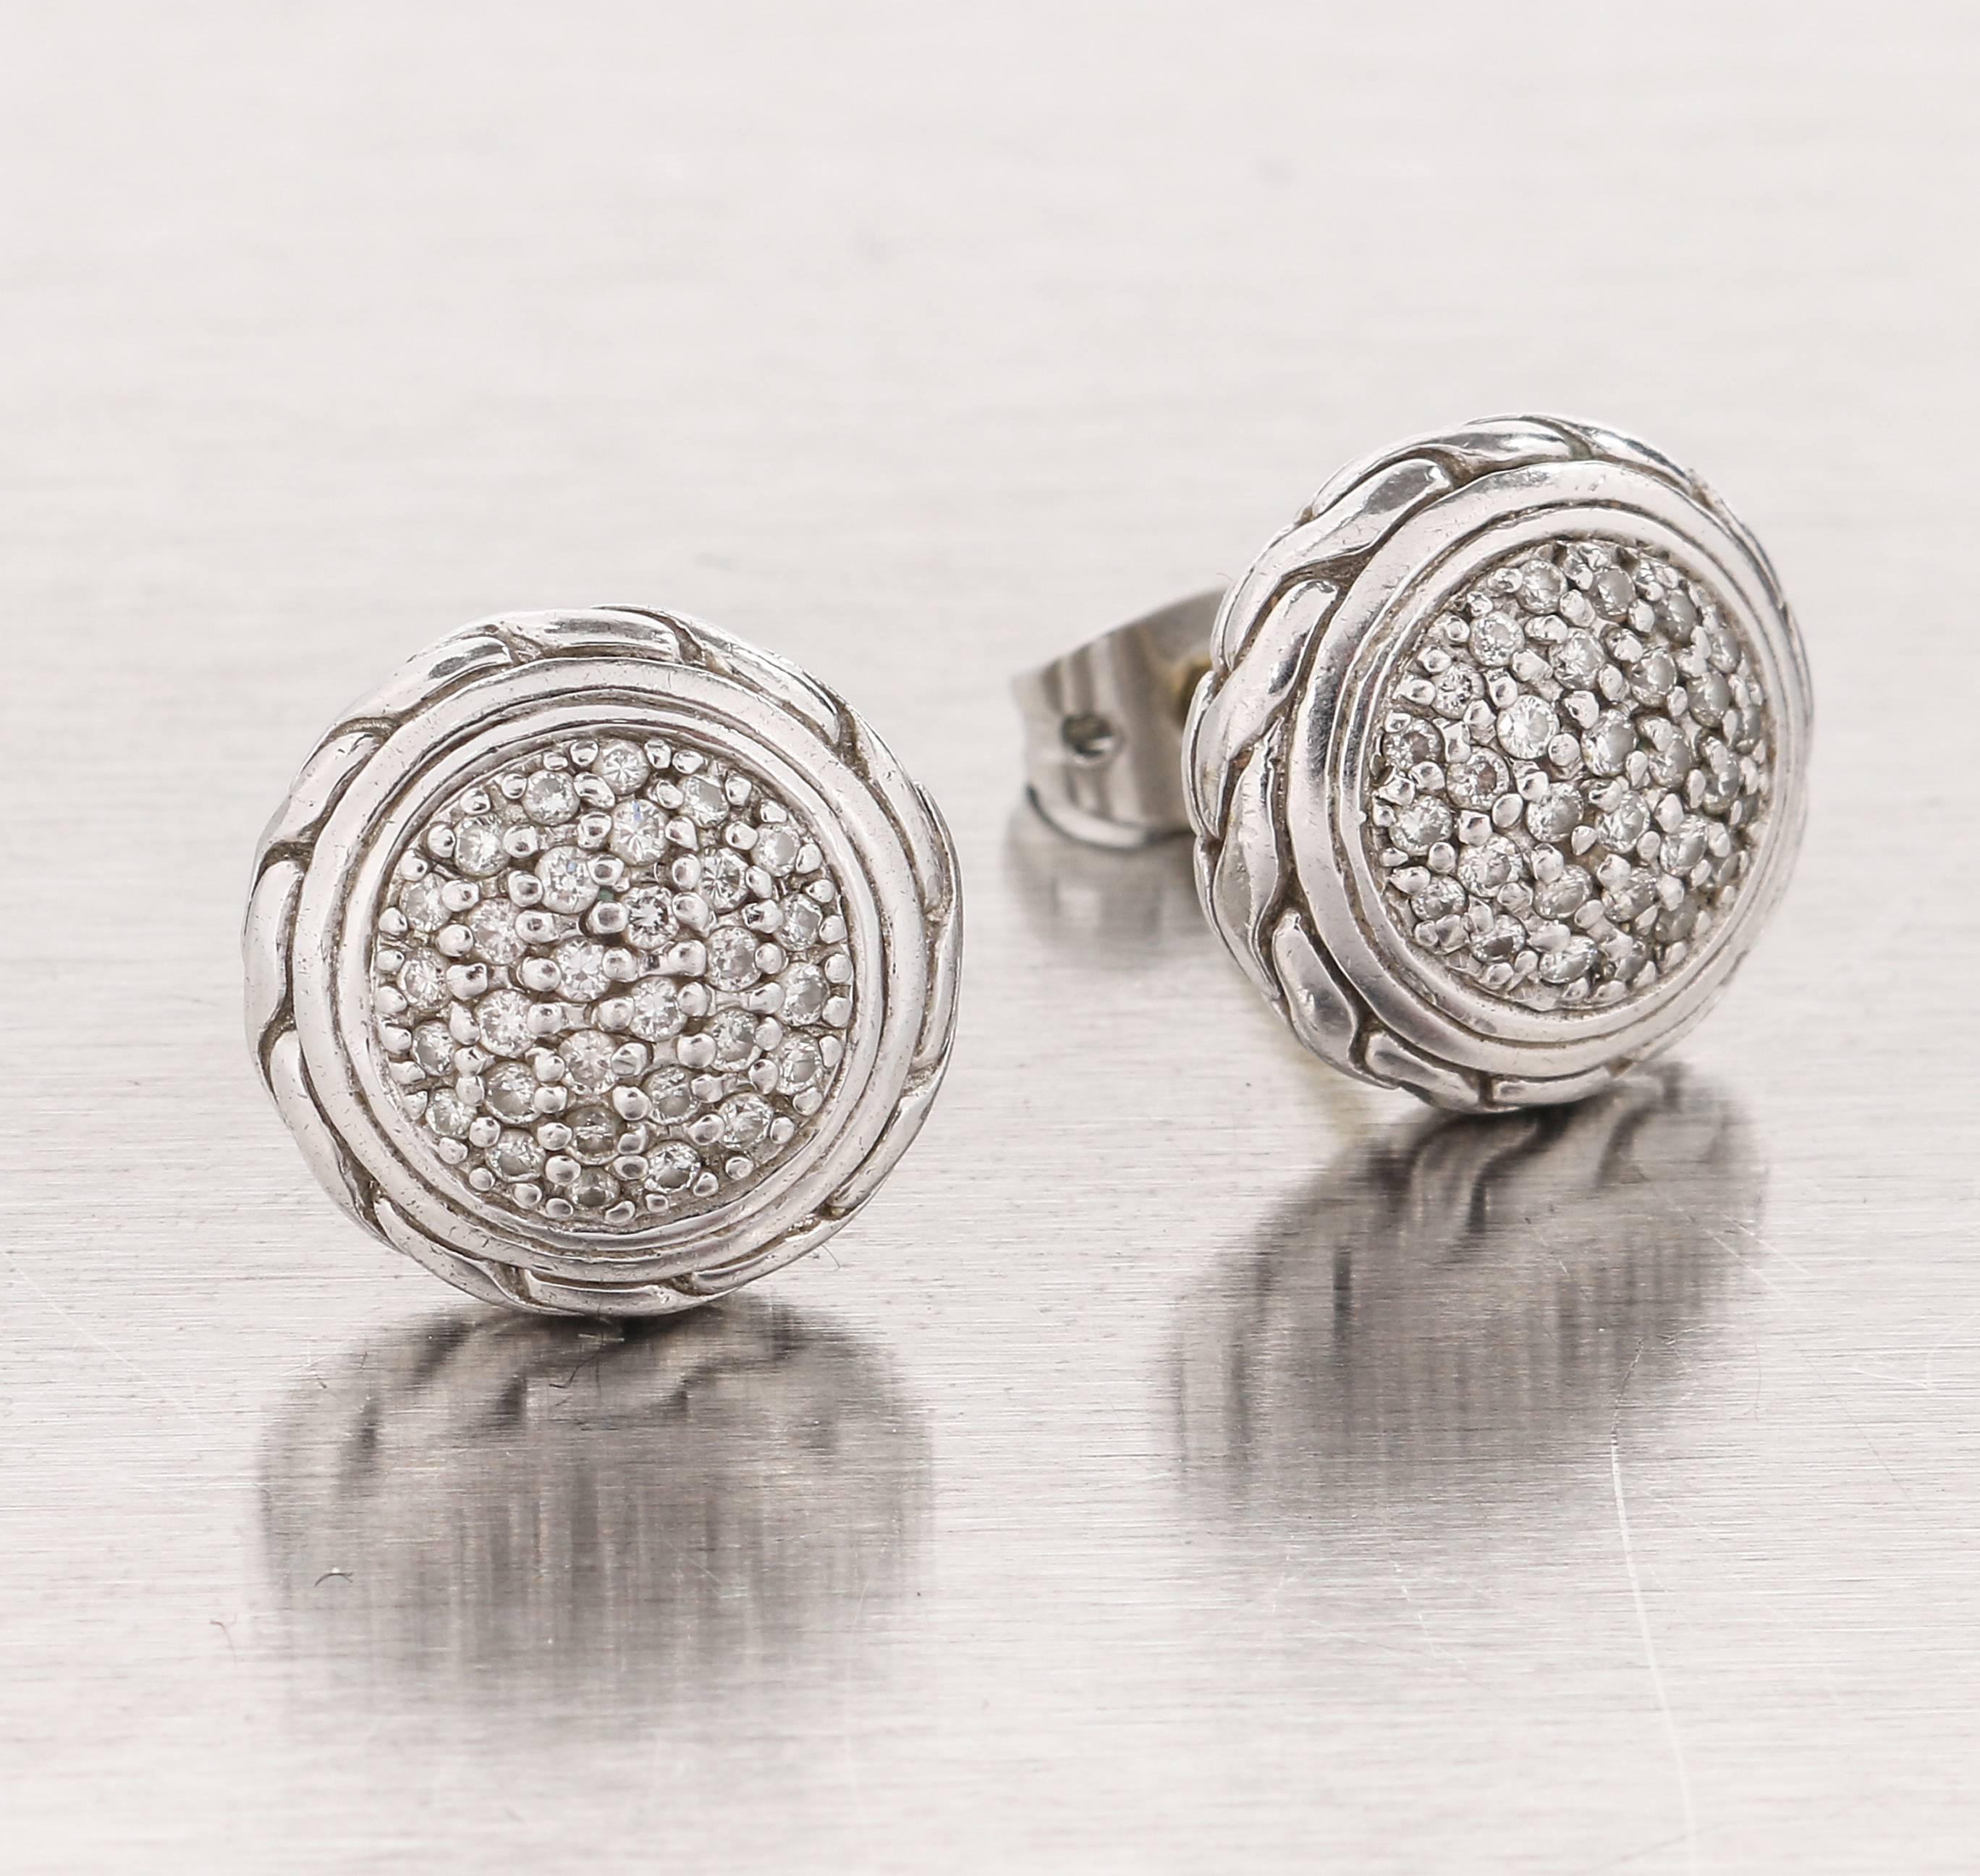 John Hardy from the “Classic Chain” collection round pave diamond sterling silver and 18k gold stud earrings. Round sterling silver faceted paved diamond stud earrings (approximately measuring 12mm W X 12mm L X 16mm H, including 18K gold backing